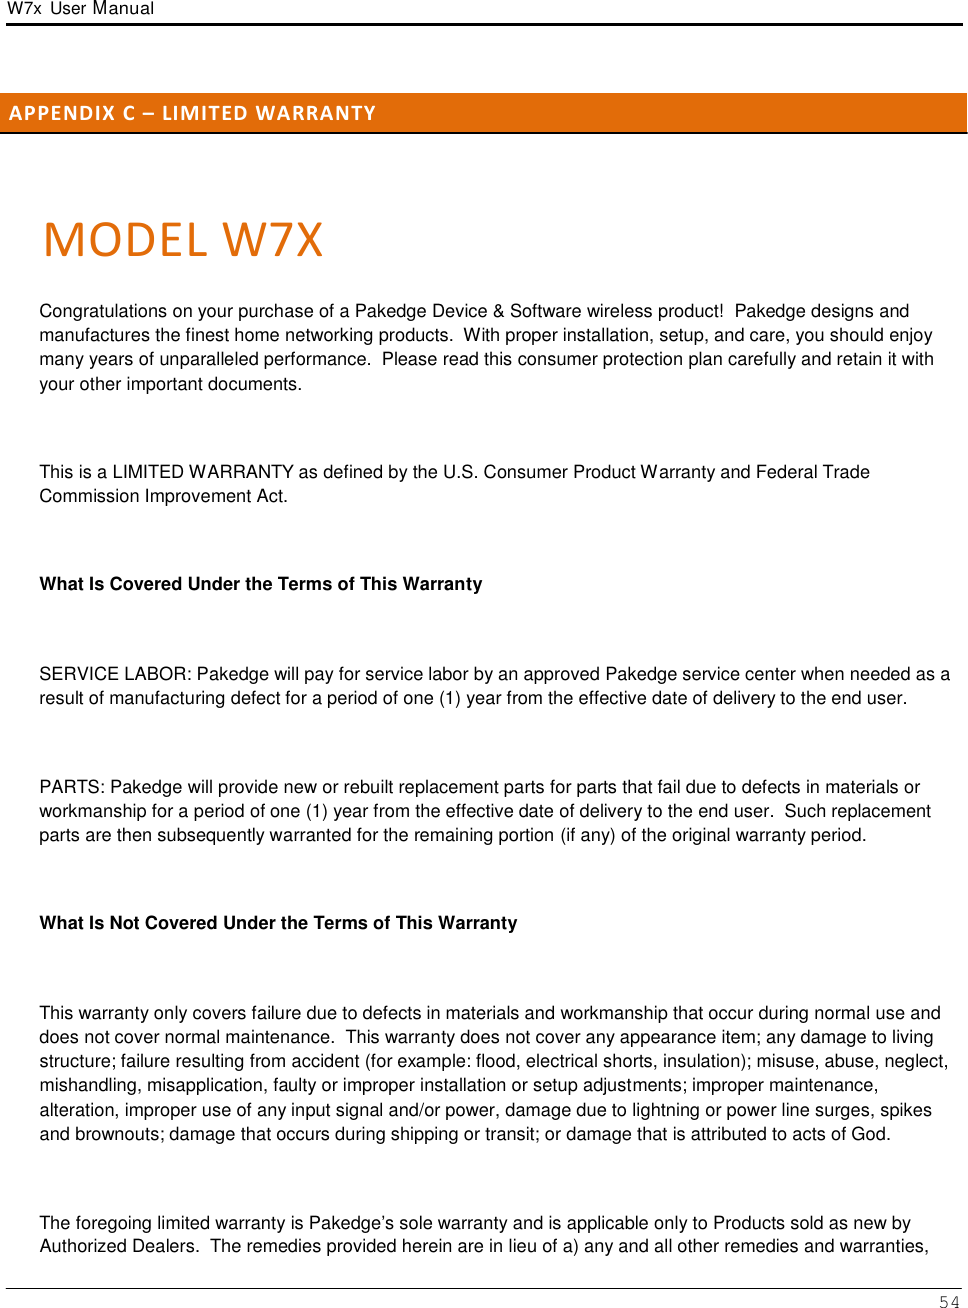 W7x  User Manual 54       A P P E N D I X  C  –  LI M I T E D W A R R A N T Y     MODEL W7X  Congratulations on your purchase of a Pakedge Device &amp; Software wireless product!  Pakedge designs and manufactures the finest home networking products.  With proper installation, setup, and care, you should enjoy many years of unparalleled performance.  Please read this consumer protection plan carefully and retain it with your other important documents.    This is a LIMITED WARRANTY as defined by the U.S. Consumer Product Warranty and Federal Trade Commission Improvement Act.    What Is Covered Under the Terms of This Warranty    SERVICE LABOR: Pakedge will pay for service labor by an approved Pakedge service center when needed as a result of manufacturing defect for a period of one (1) year from the effective date of delivery to the end user.    PARTS: Pakedge will provide new or rebuilt replacement parts for parts that fail due to defects in materials or workmanship for a period of one (1) year from the effective date of delivery to the end user.  Such replacement parts are then subsequently warranted for the remaining portion (if any) of the original warranty period.    What Is Not Covered Under the Terms of This Warranty    This warranty only covers failure due to defects in materials and workmanship that occur during normal use and does not cover normal maintenance.  This warranty does not cover any appearance item; any damage to living structure; failure resulting from accident (for example: flood, electrical shorts, insulation); misuse, abuse, neglect, mishandling, misapplication, faulty or improper installation or setup adjustments; improper maintenance, alteration, improper use of any input signal and/or power, damage due to lightning or power line surges, spikes and brownouts; damage that occurs during shipping or transit; or damage that is attributed to acts of God.    The foregoing limited warranty is Pakedge’s sole warranty and is applicable only to Products sold as new by Authorized Dealers.  The remedies provided herein are in lieu of a) any and all other remedies and warranties, 